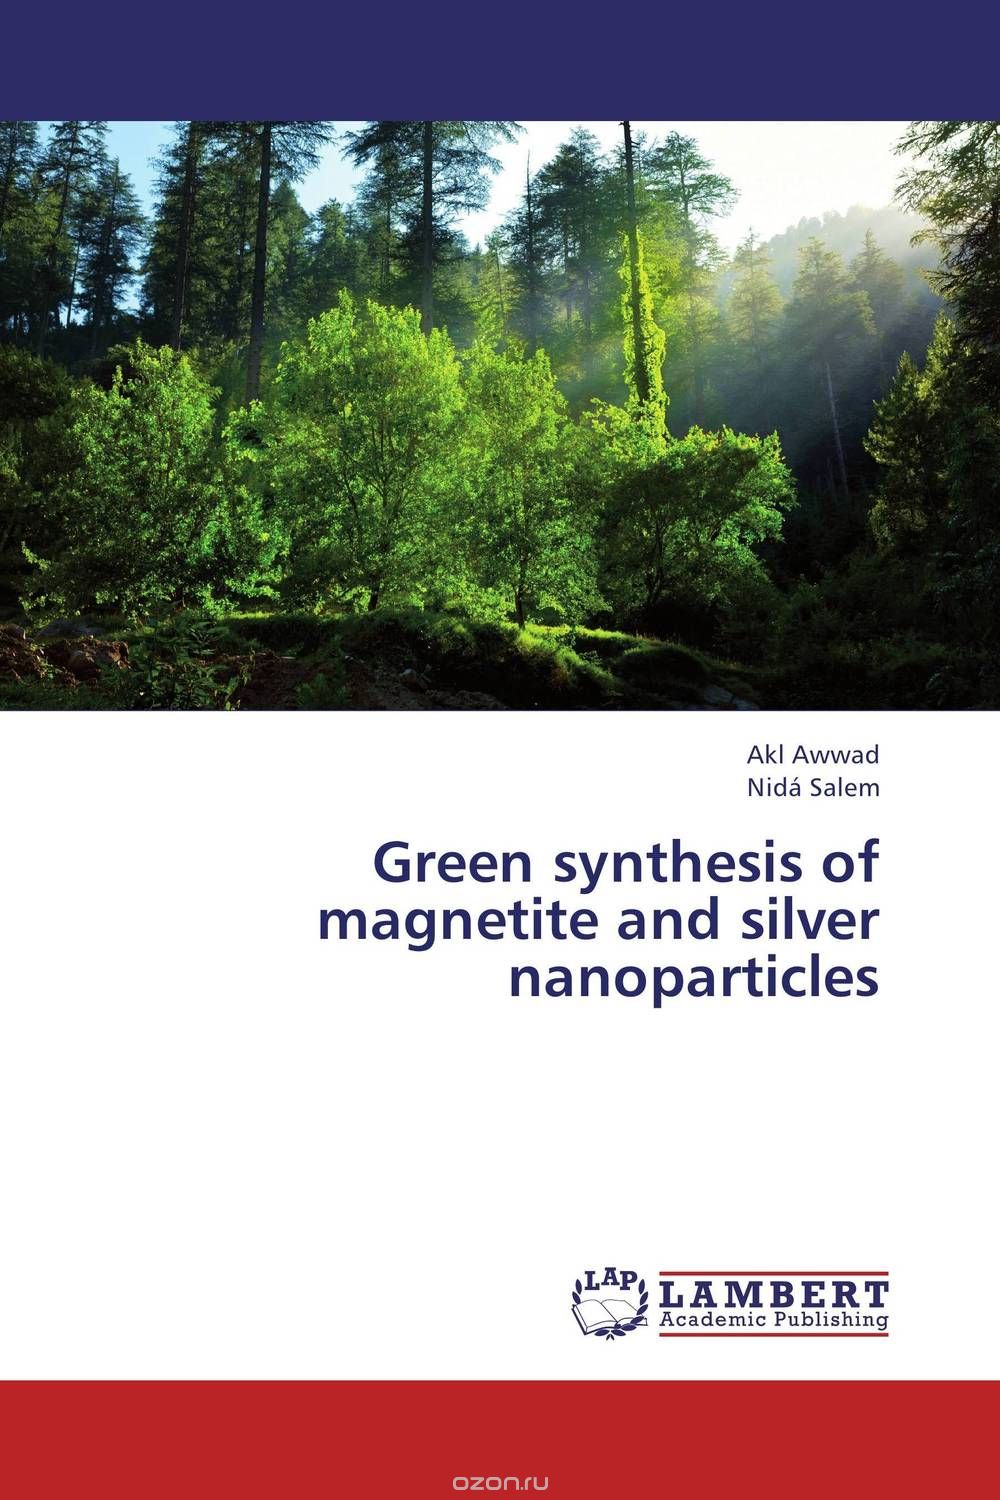 Green synthesis of magnetite and silver nanoparticles